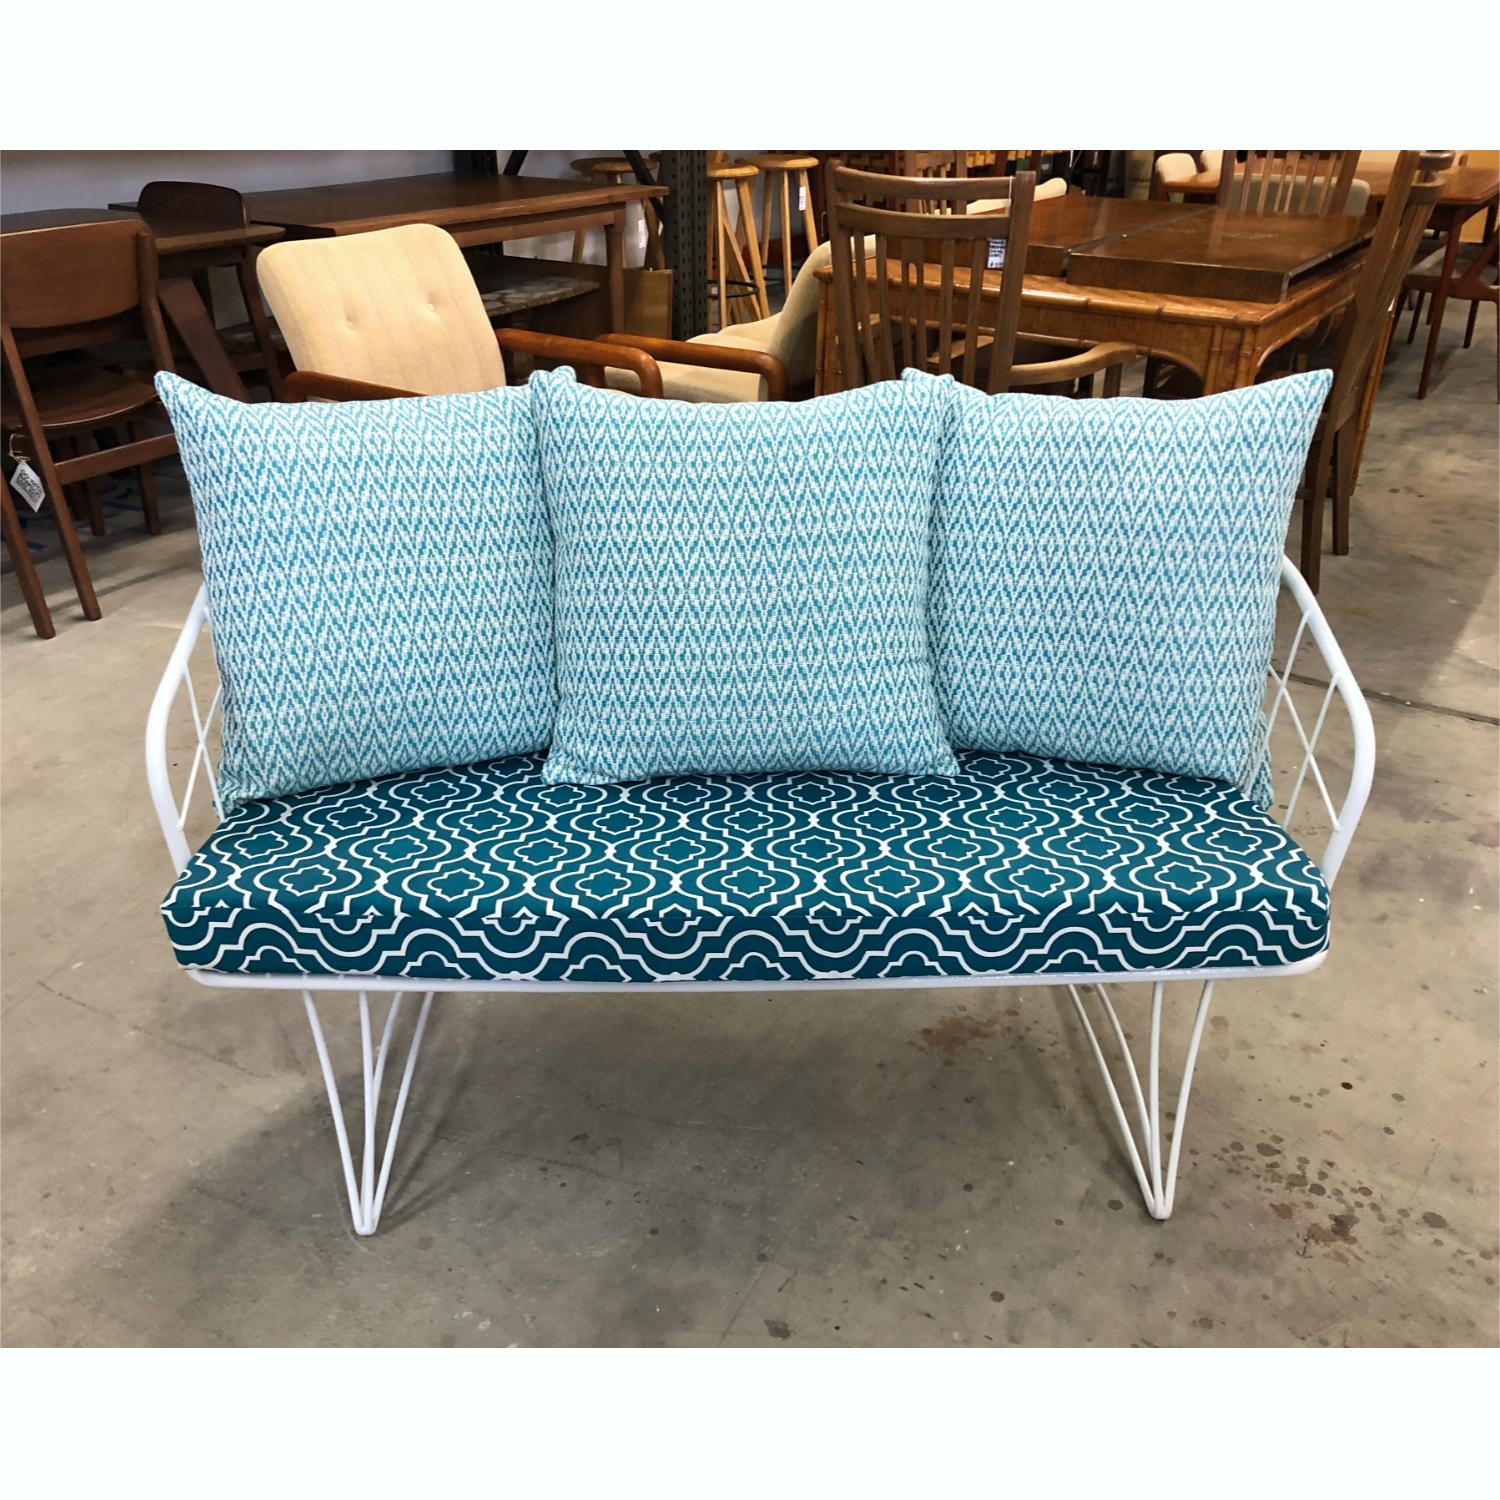 Completely restored Mid-Century Modern outdoor loveseat by Homecrest. This two-person sofa features all new white enamel paint, new cushion foam and new upholstery. The cushions have been custom created with a novel modern, yet coastal look. The